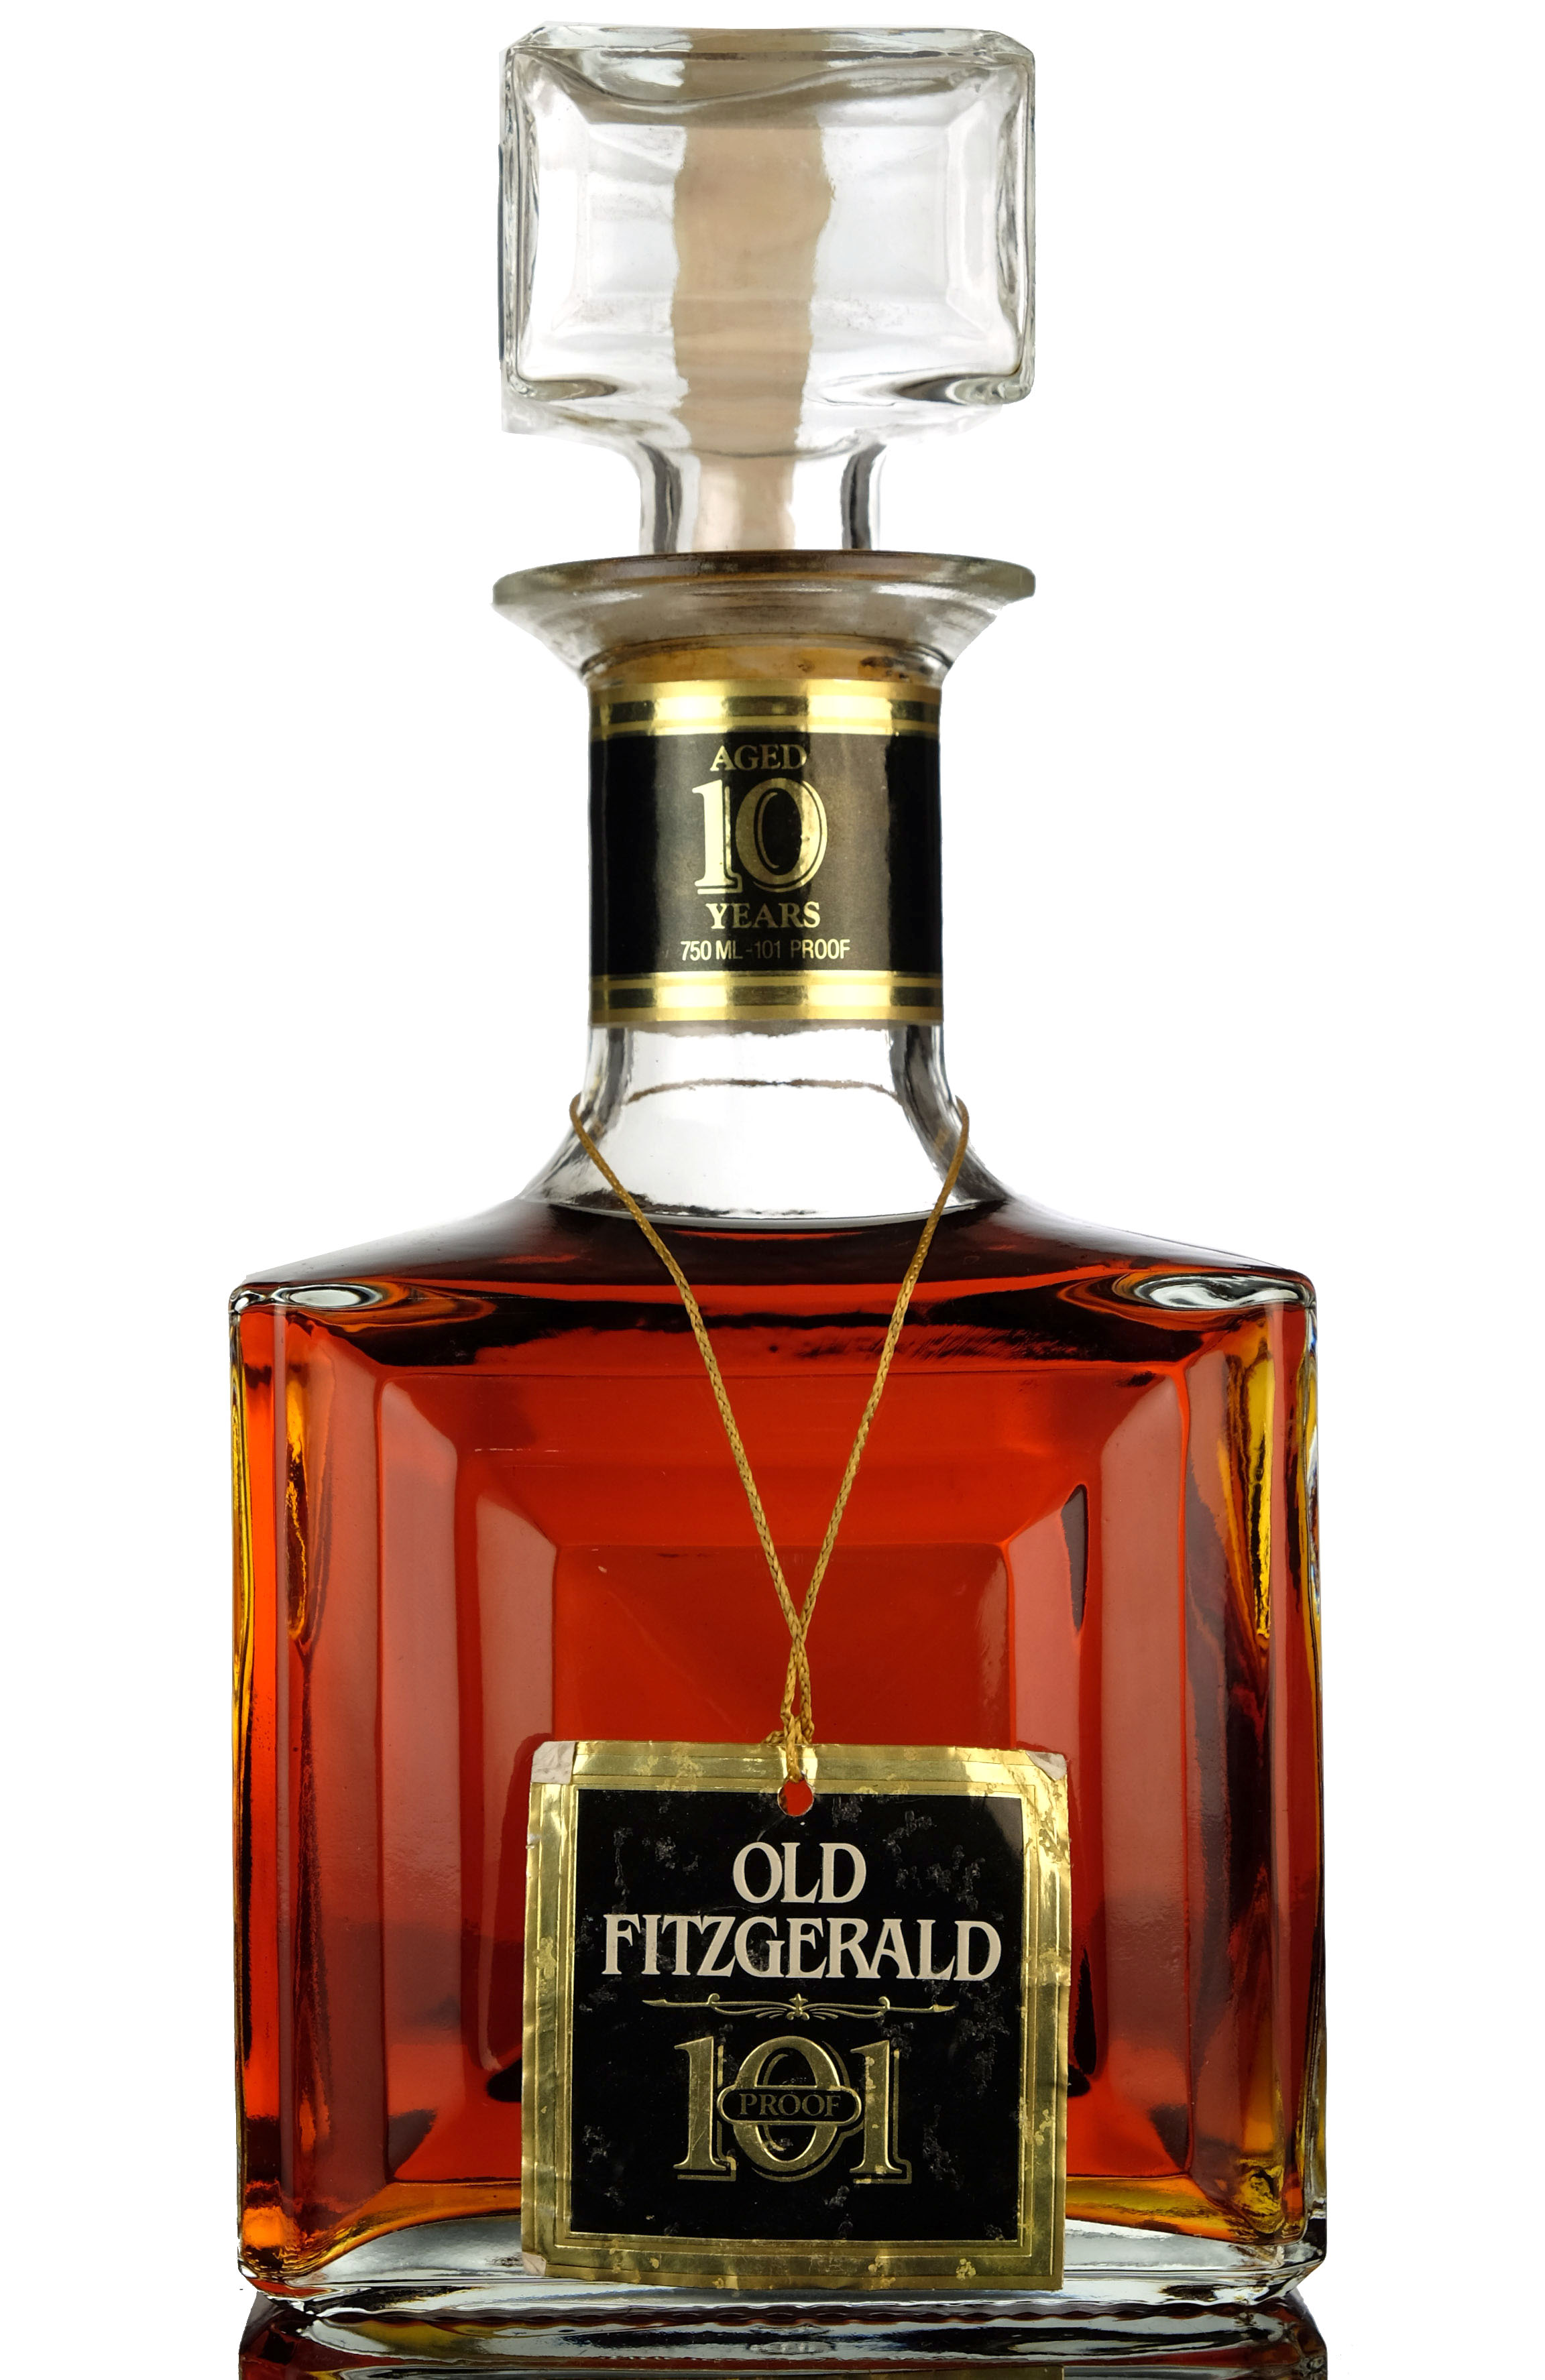 Old Fitzgerald 10 Year Old - Kentucky Straight Bourbon Whiskey